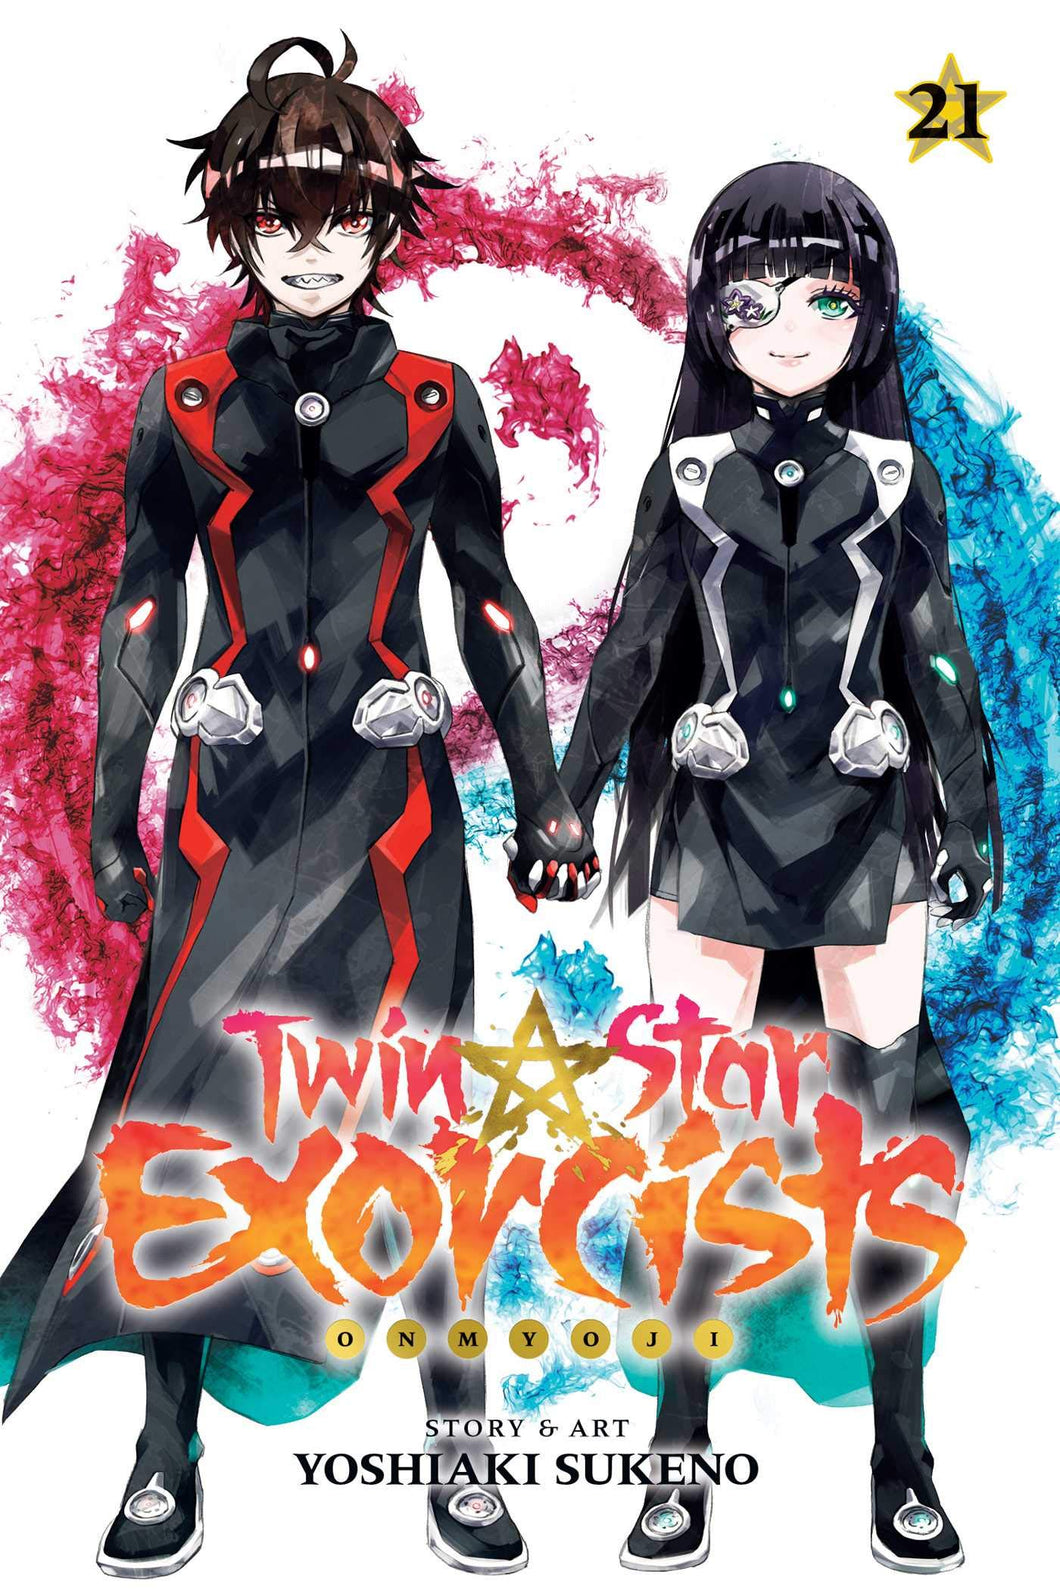 Twin Star Exorcists Volume 21